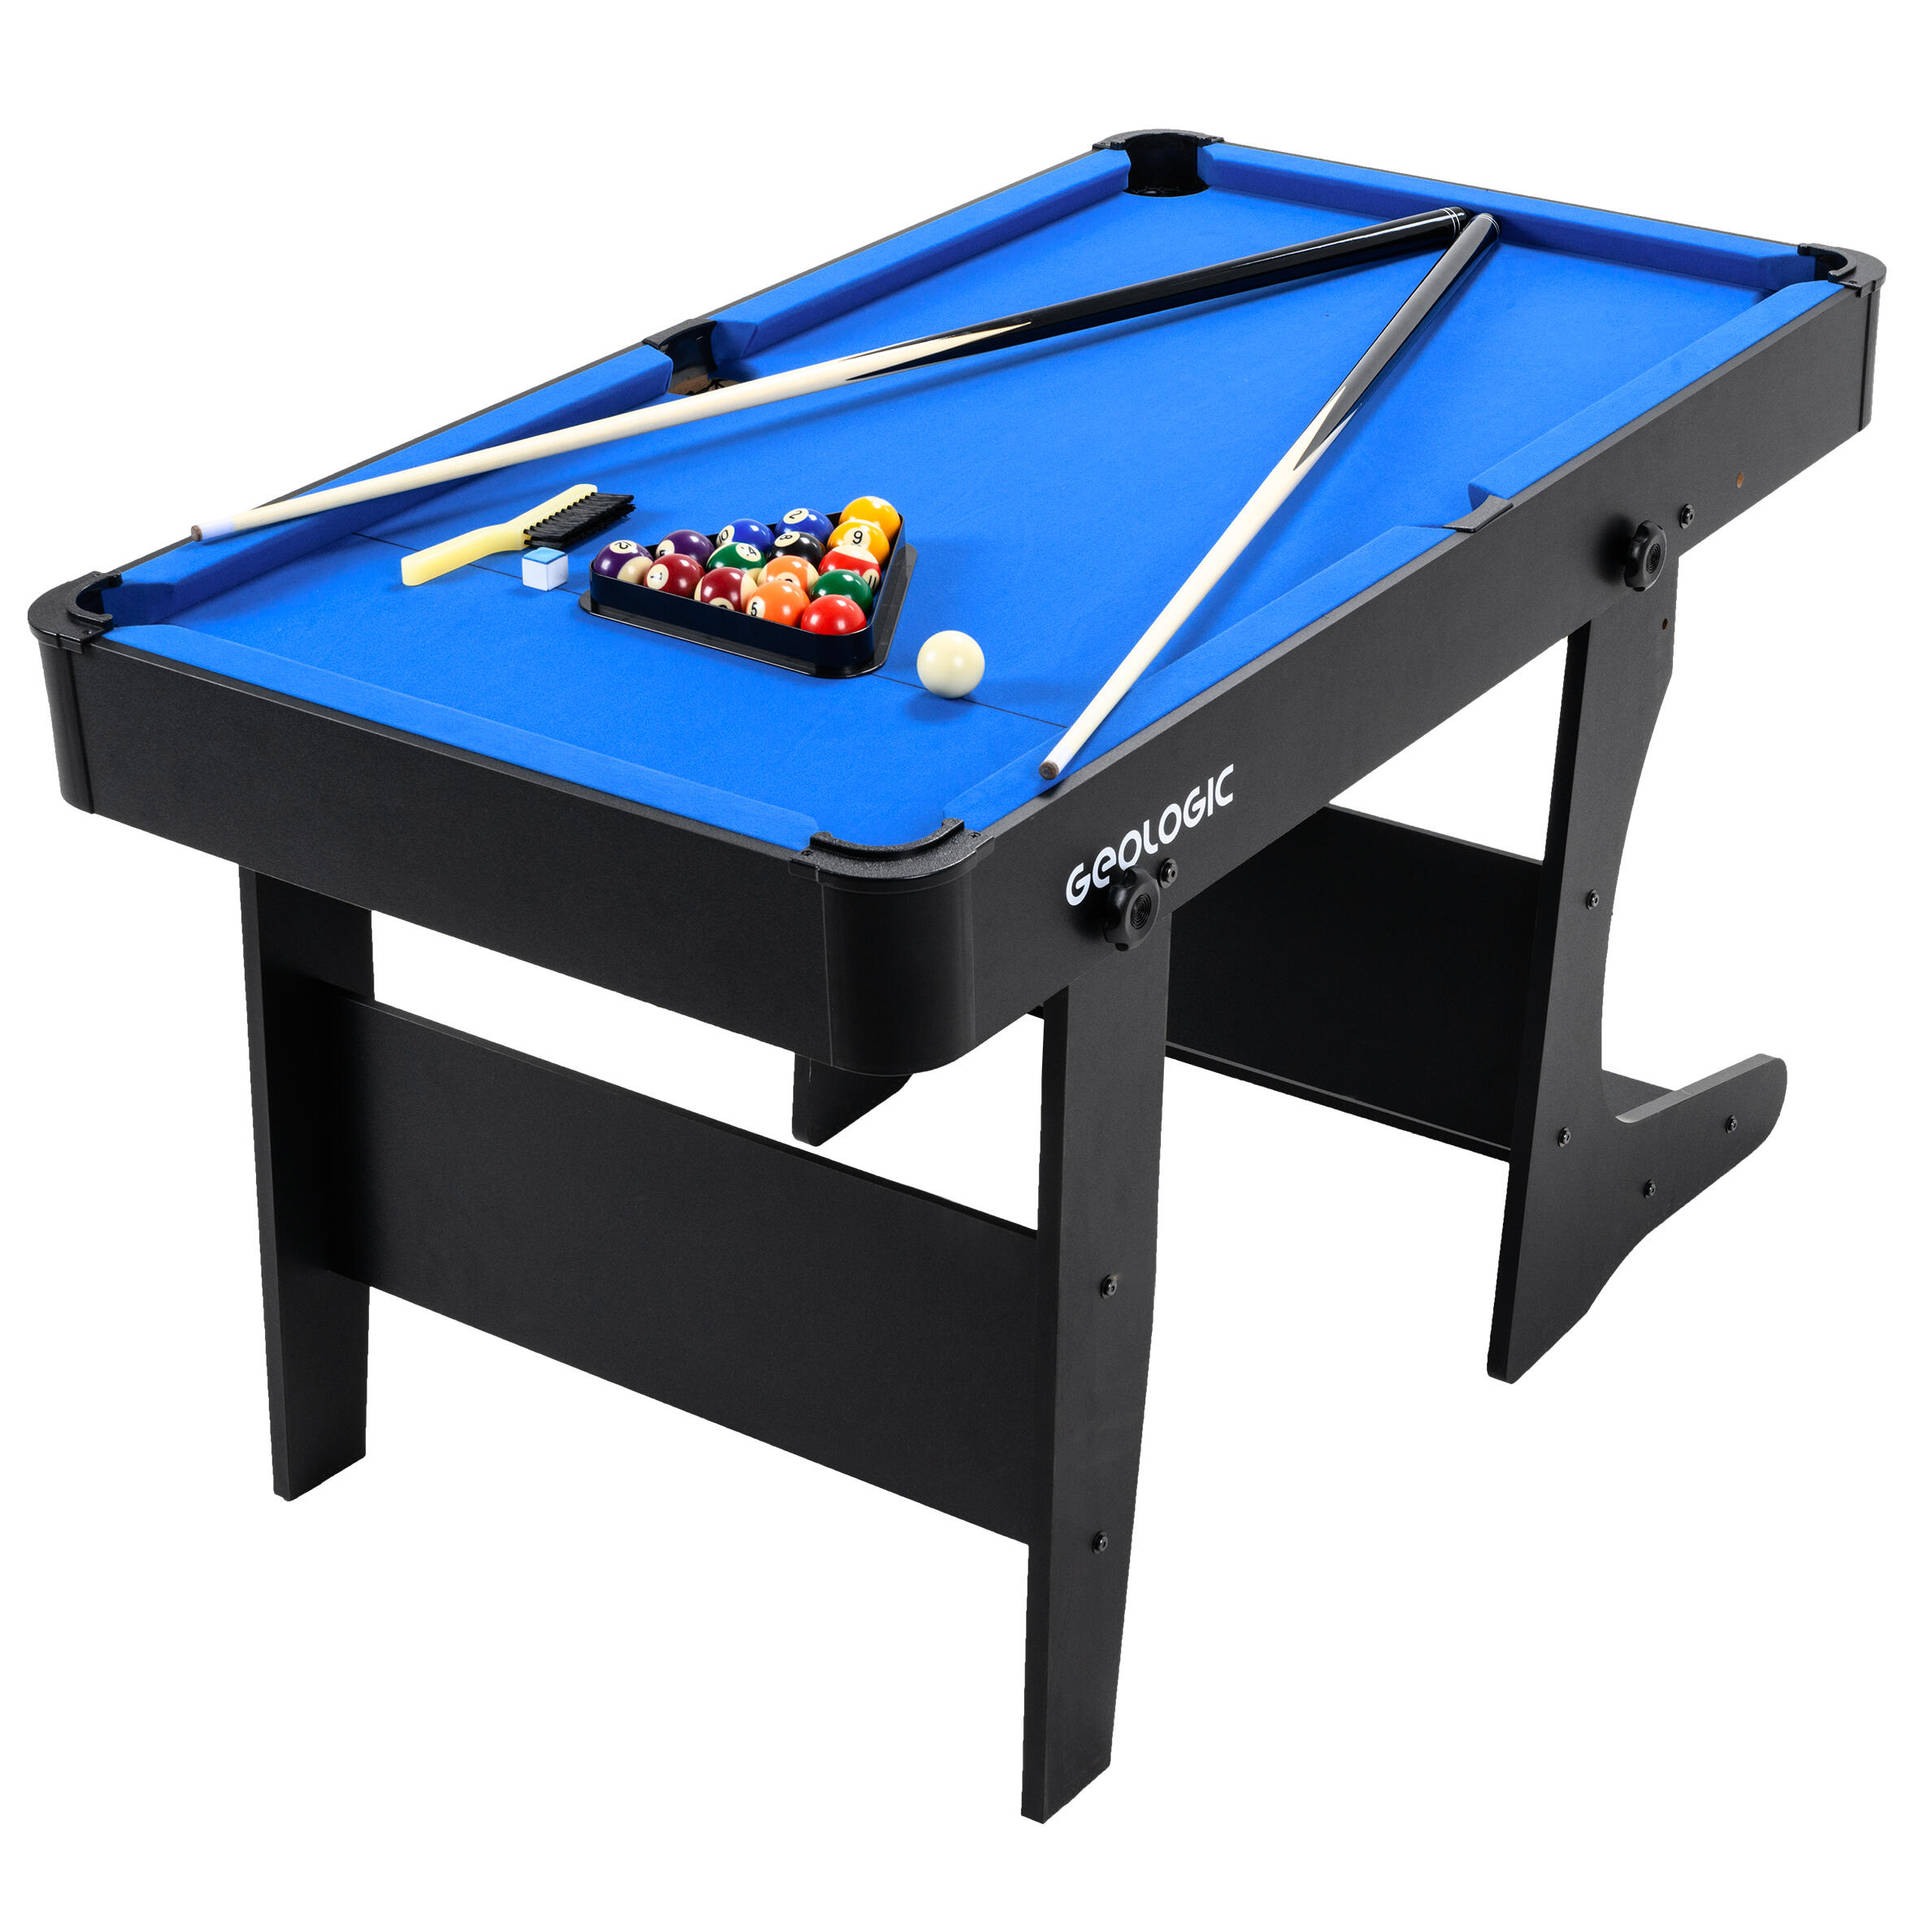 Billiards Blue And Black Pool Table Picture